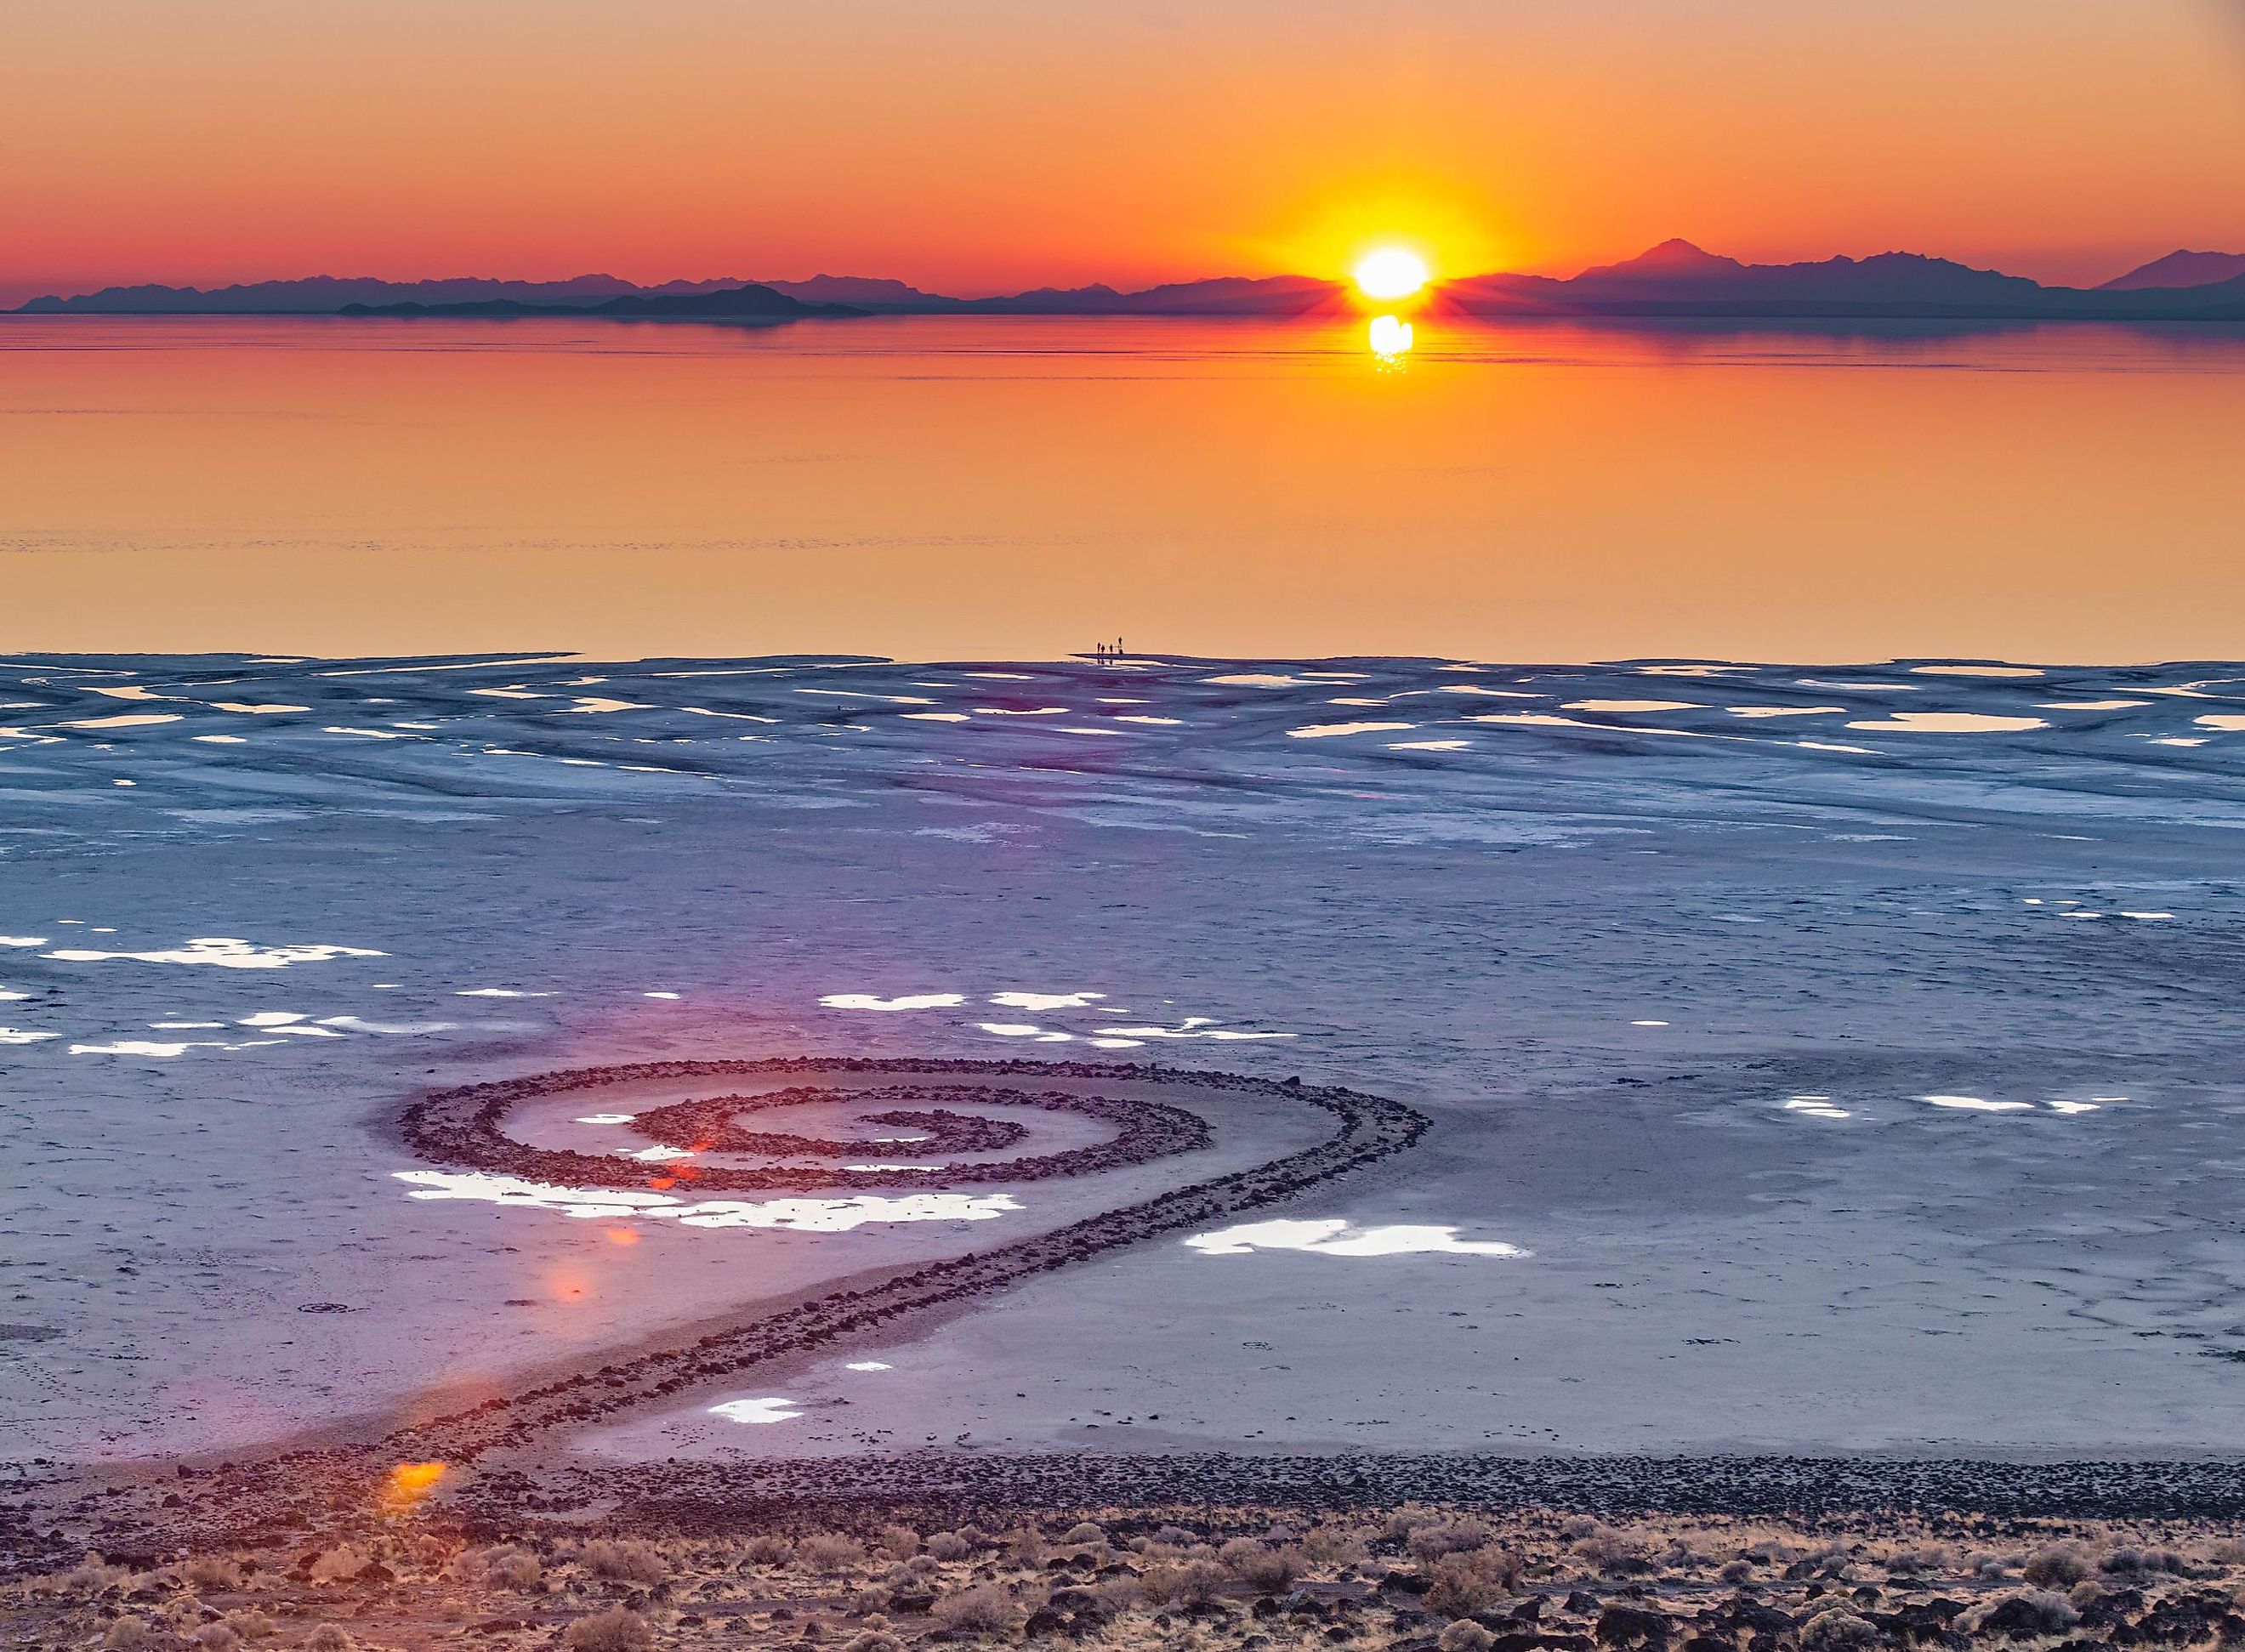 Spiral Jetty is a giant earthwork sculpture by Robert Smithson in the Great Salt Lake of northern Utah, United States.